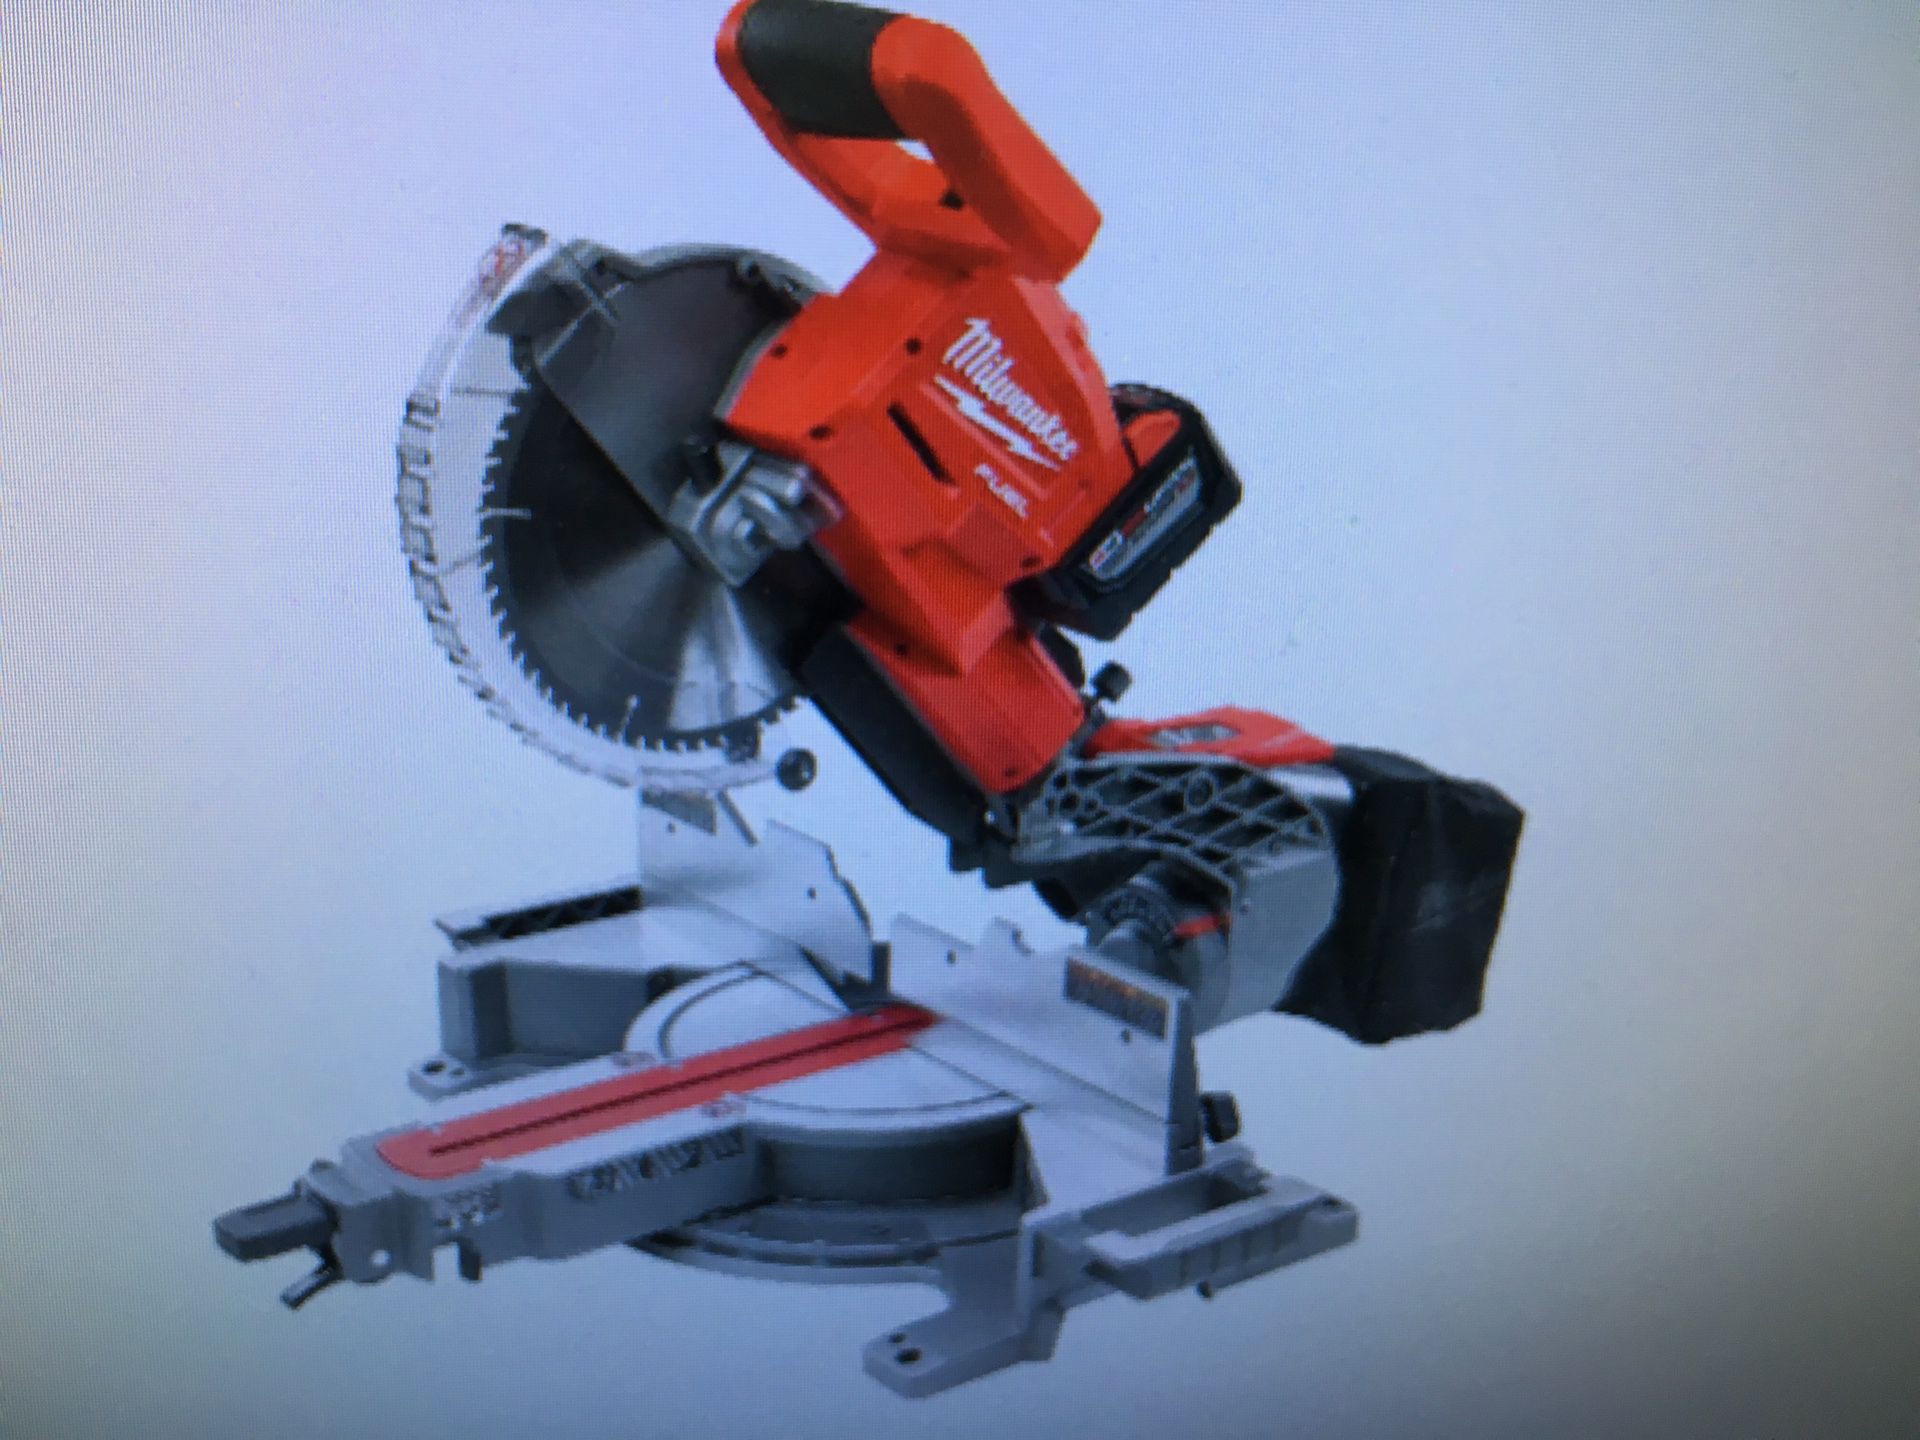 Milwaukee compound miter saw kit with 9.0AH battery